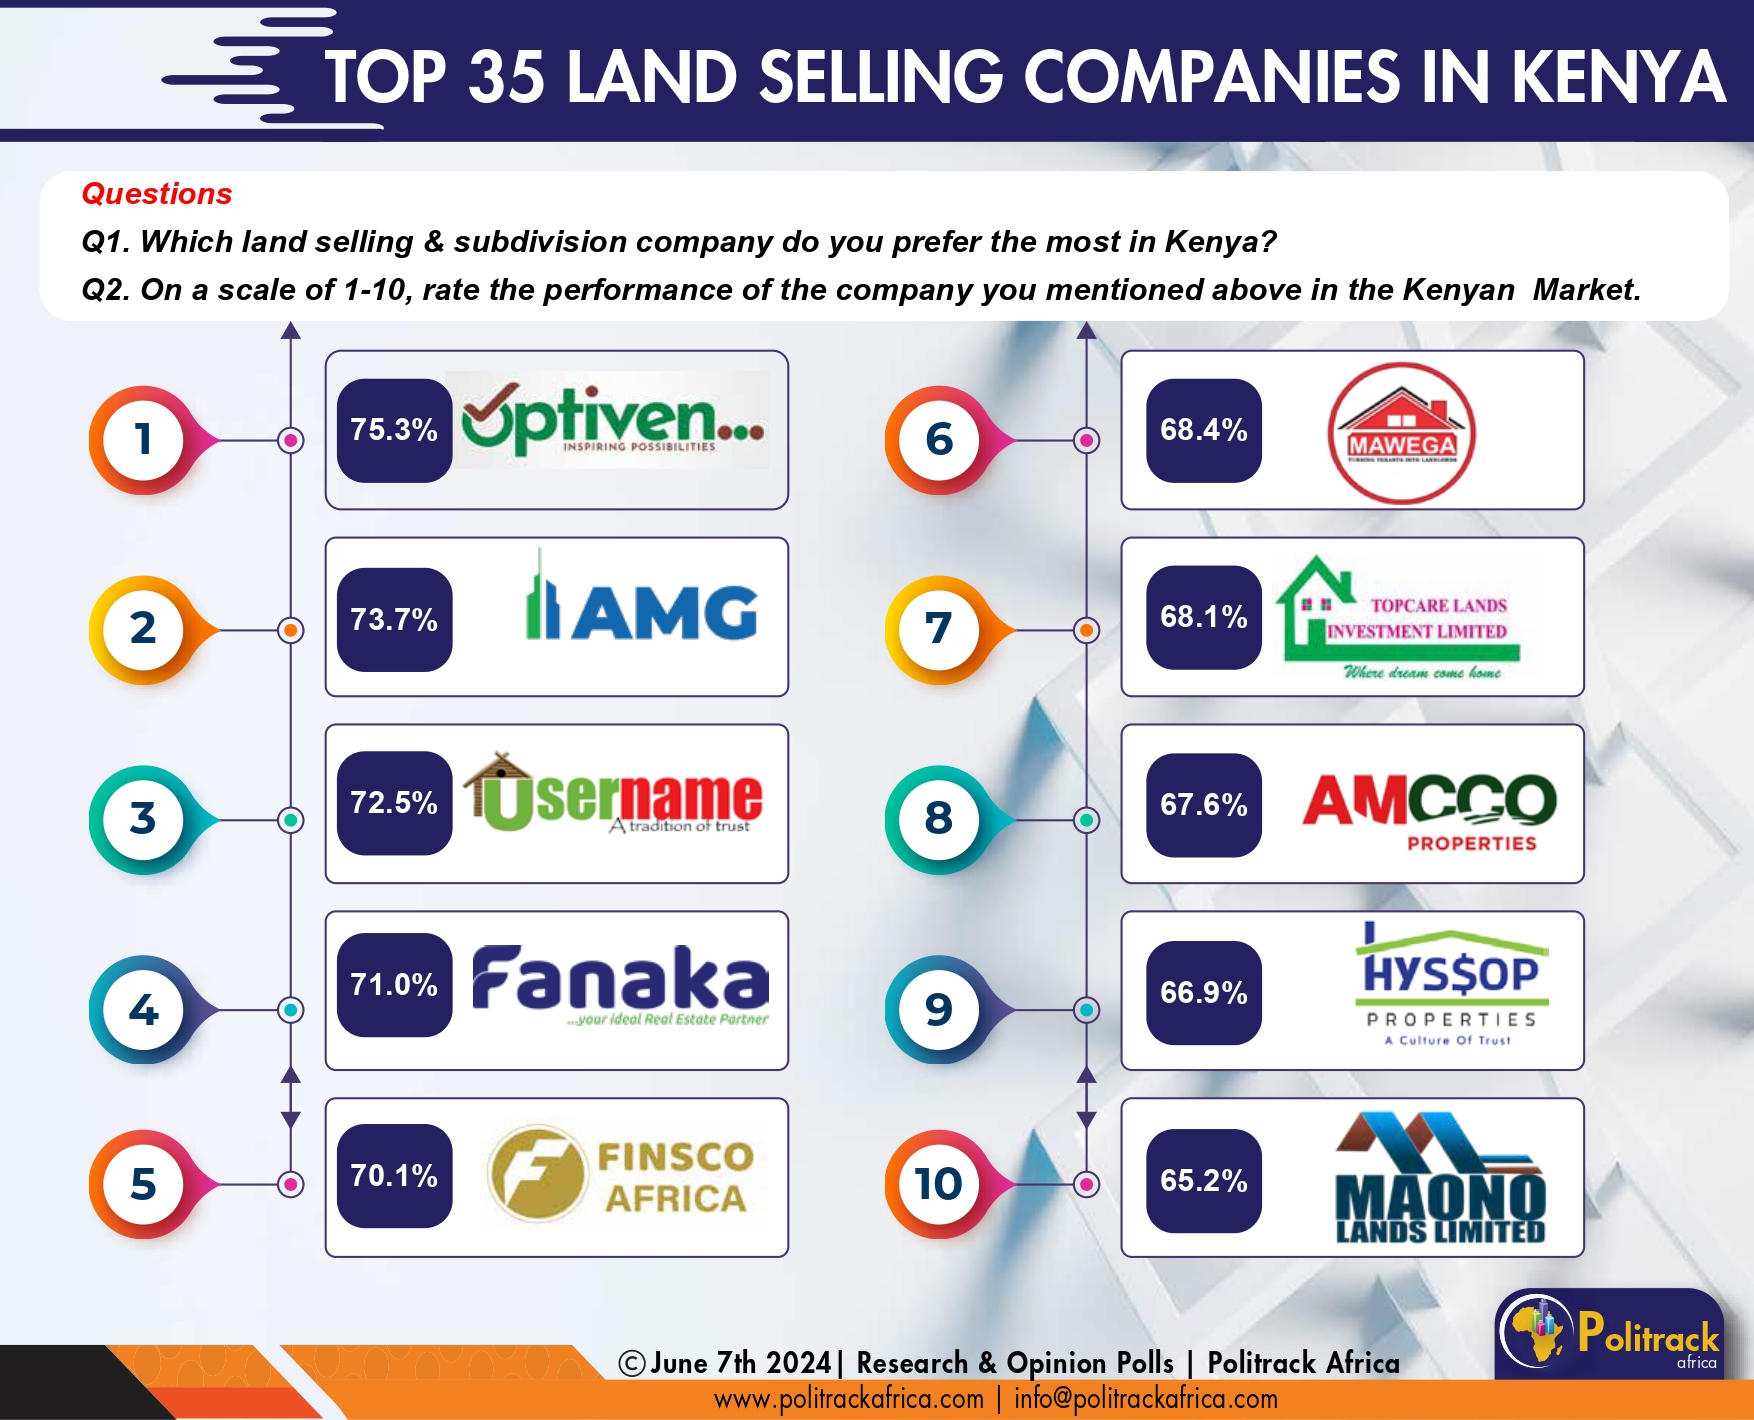 AMCCO Properties Limited Ranked Among Best Real Estate Companies in Kenya